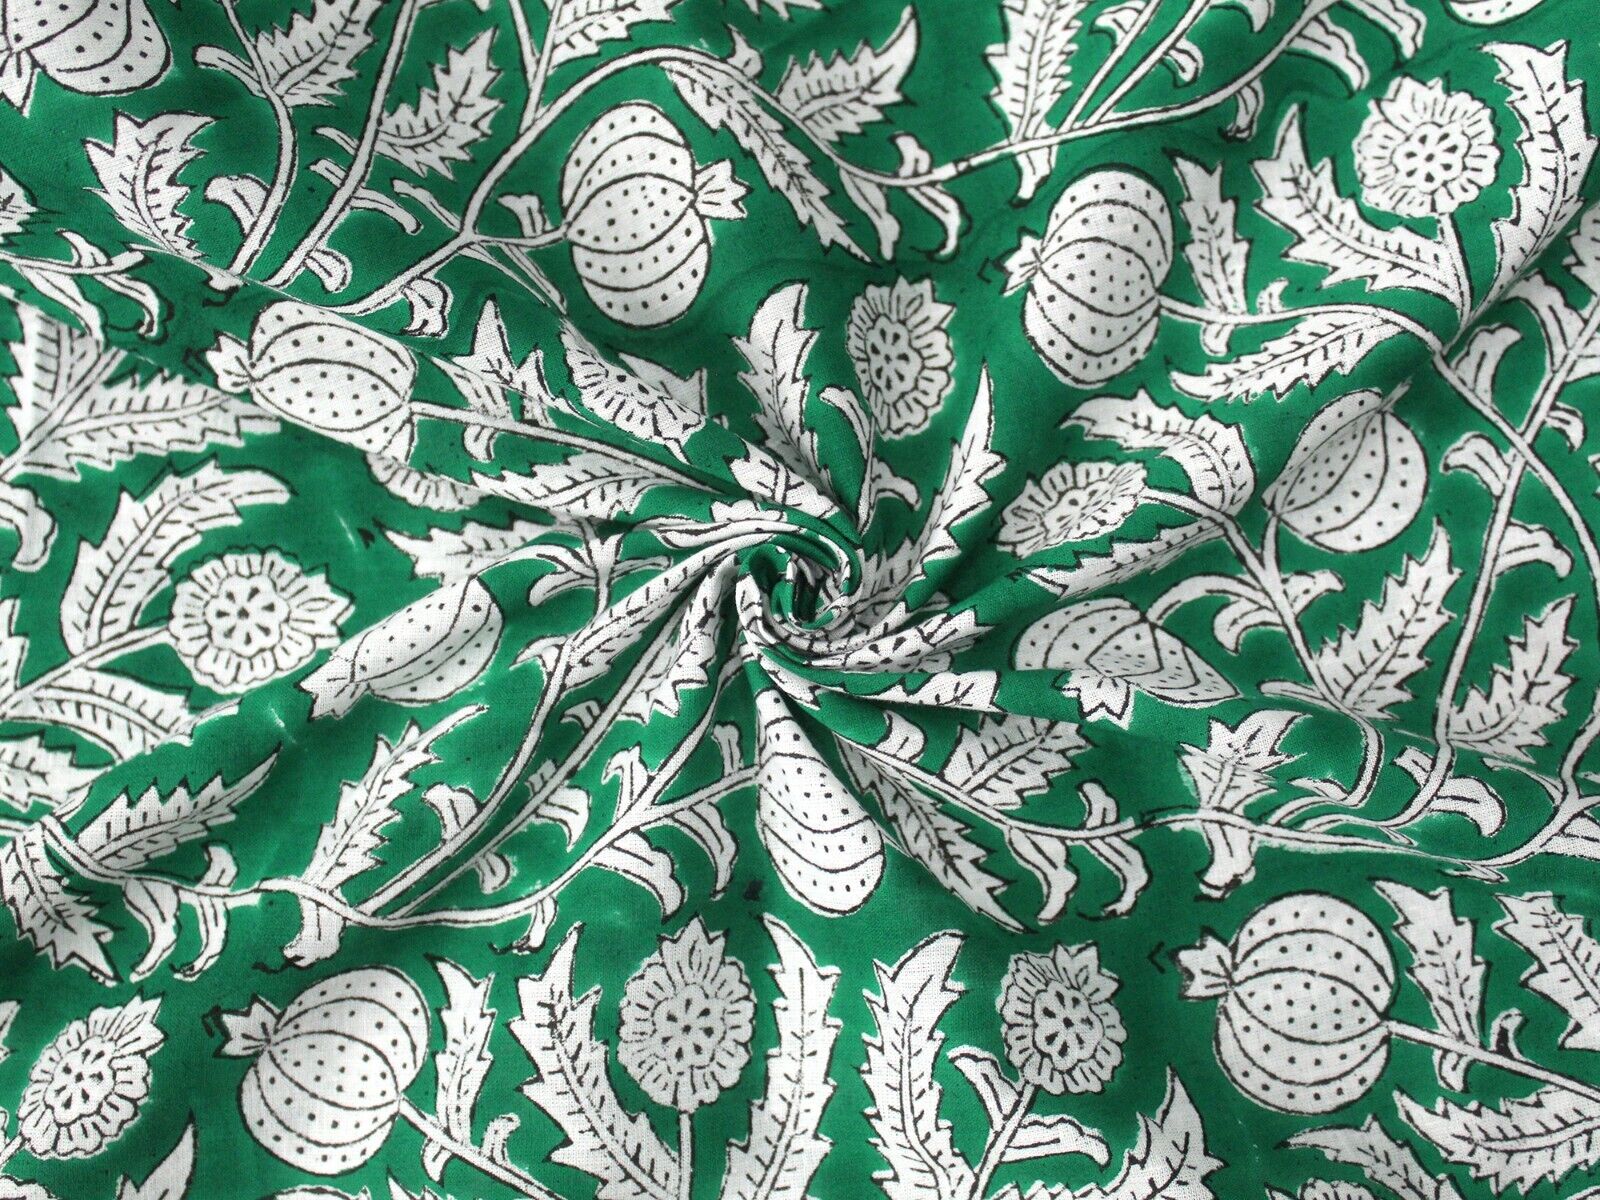 Indian Block Print Cotton Fabric Handmade Fabric for Women Fashion and Clothing